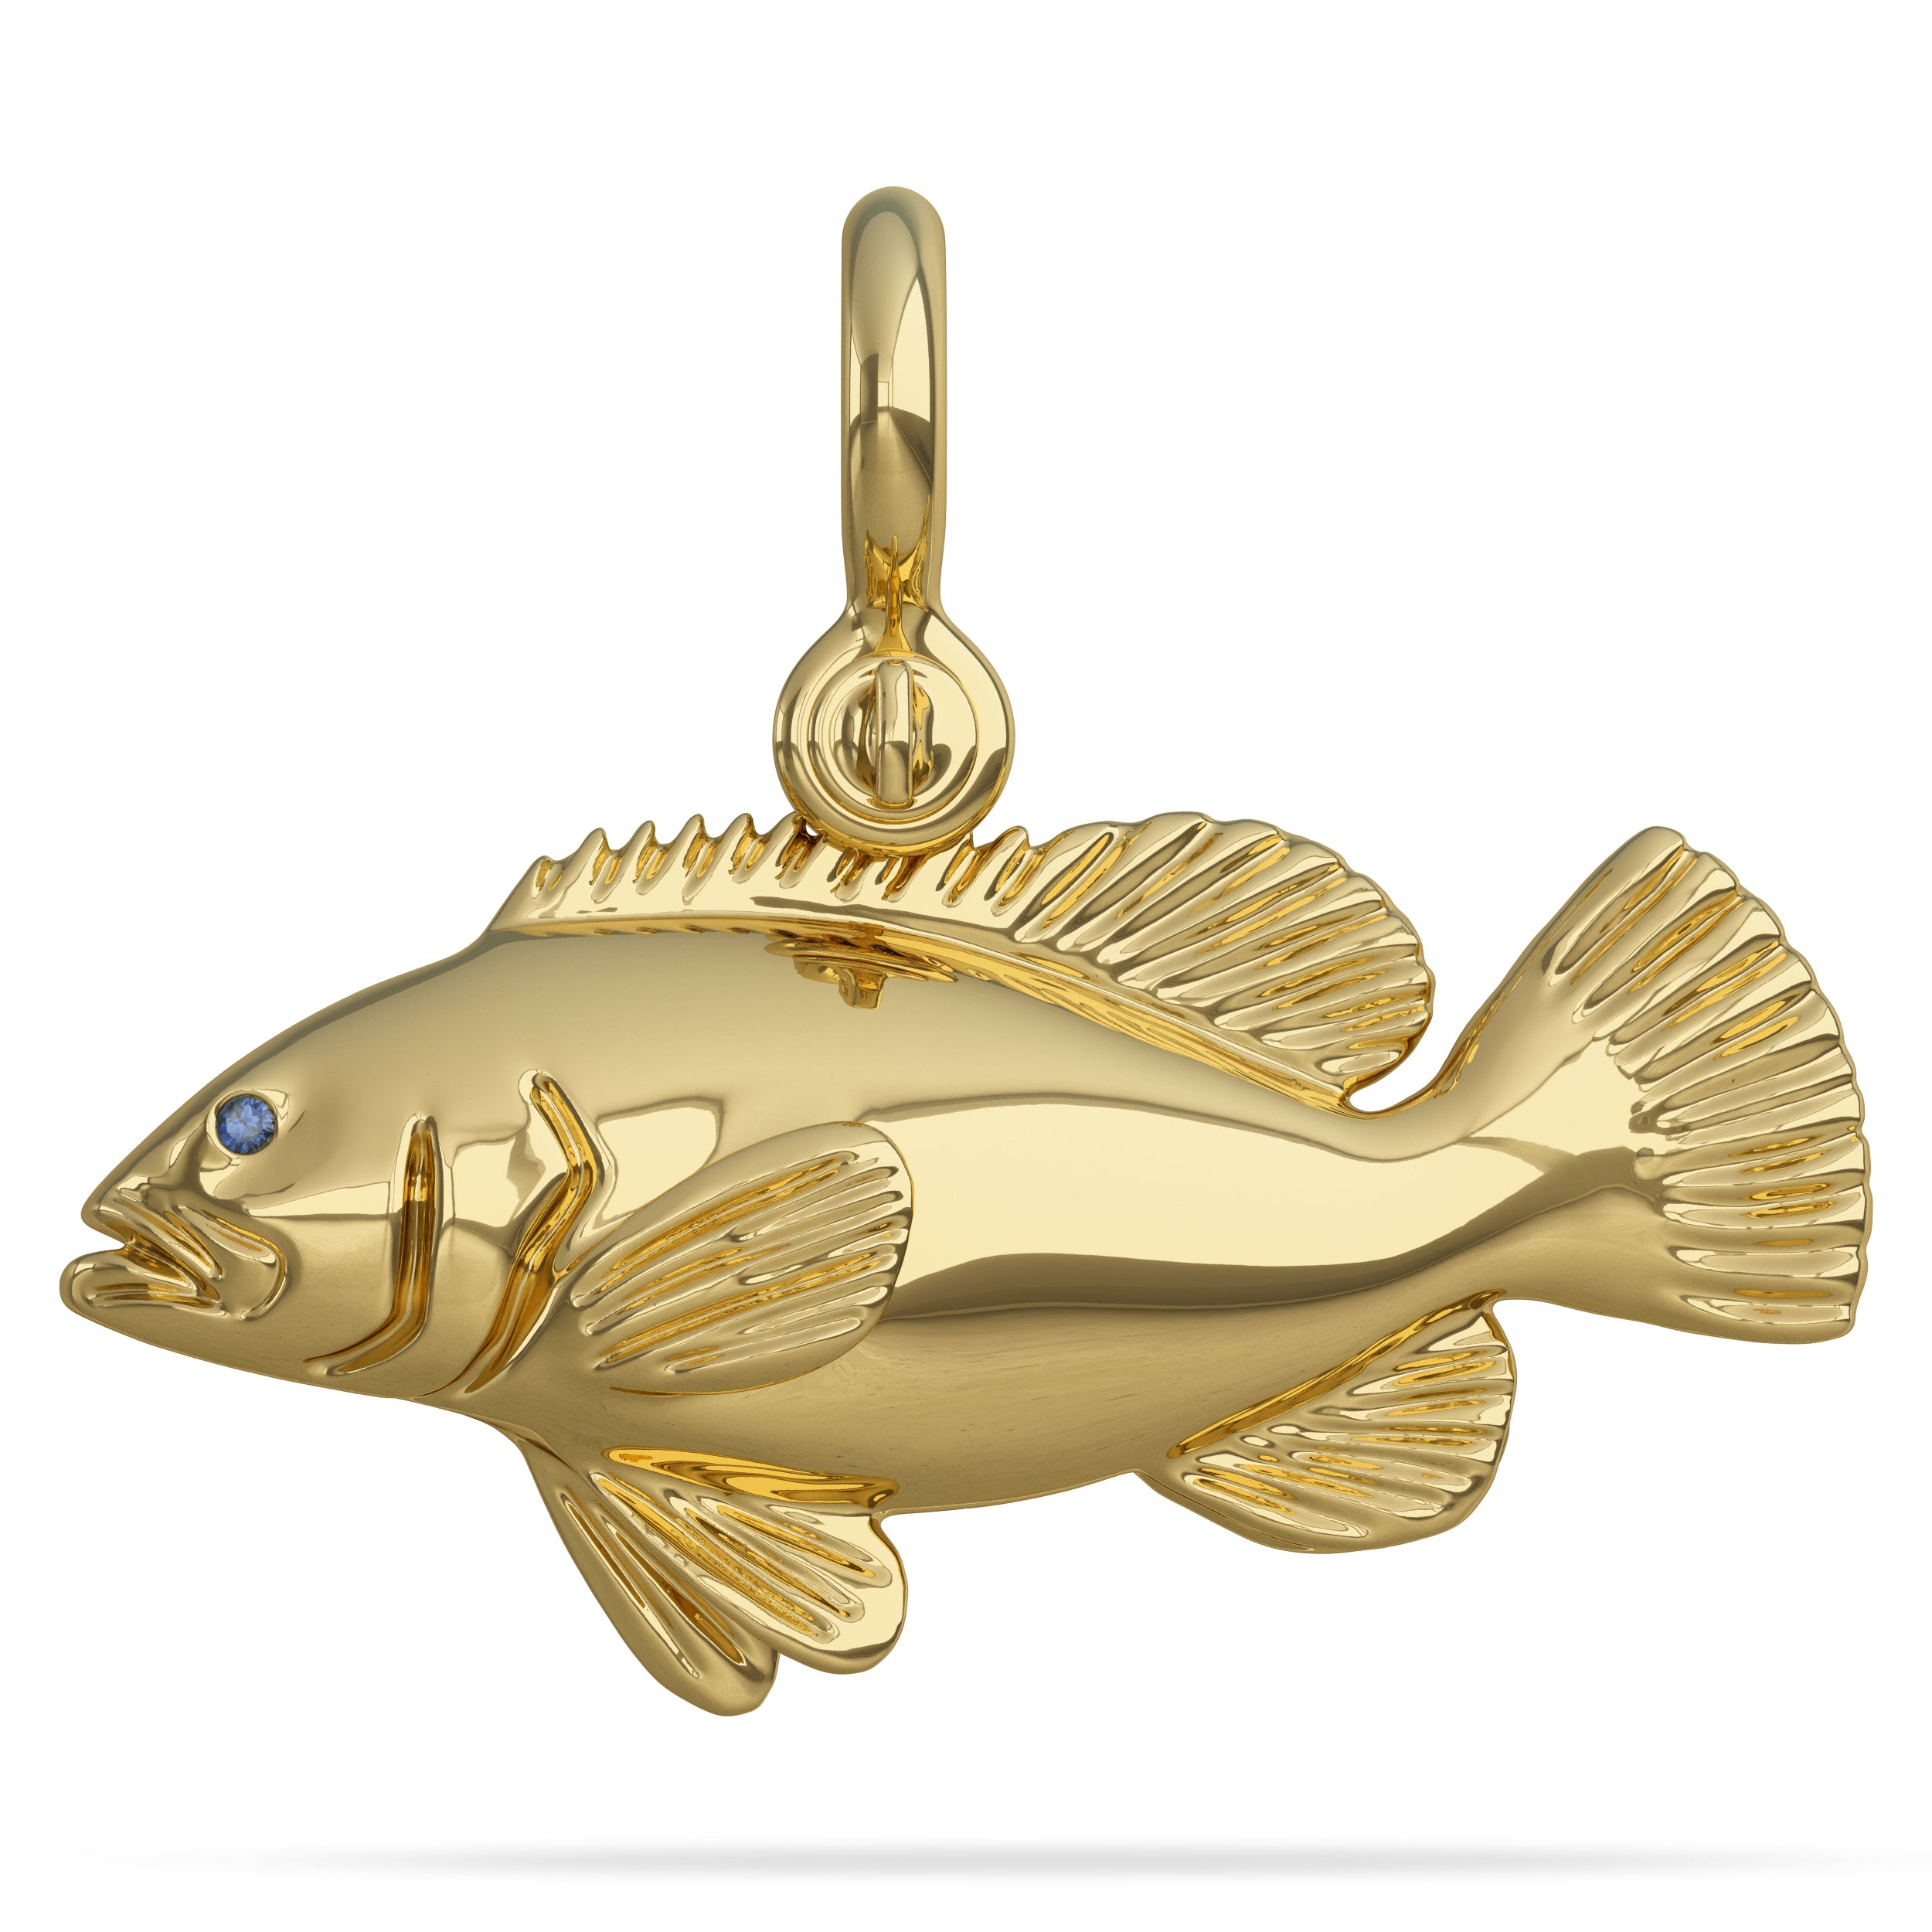 Solid 14k Gold Goliath Grouper Jew Fish Pendant High Polished Mirror Finish With Blue Sapphire Eye And A Mariner Shackle Bail Custom Designed By Nautical Treasure Jewelry In The Florida Keys 